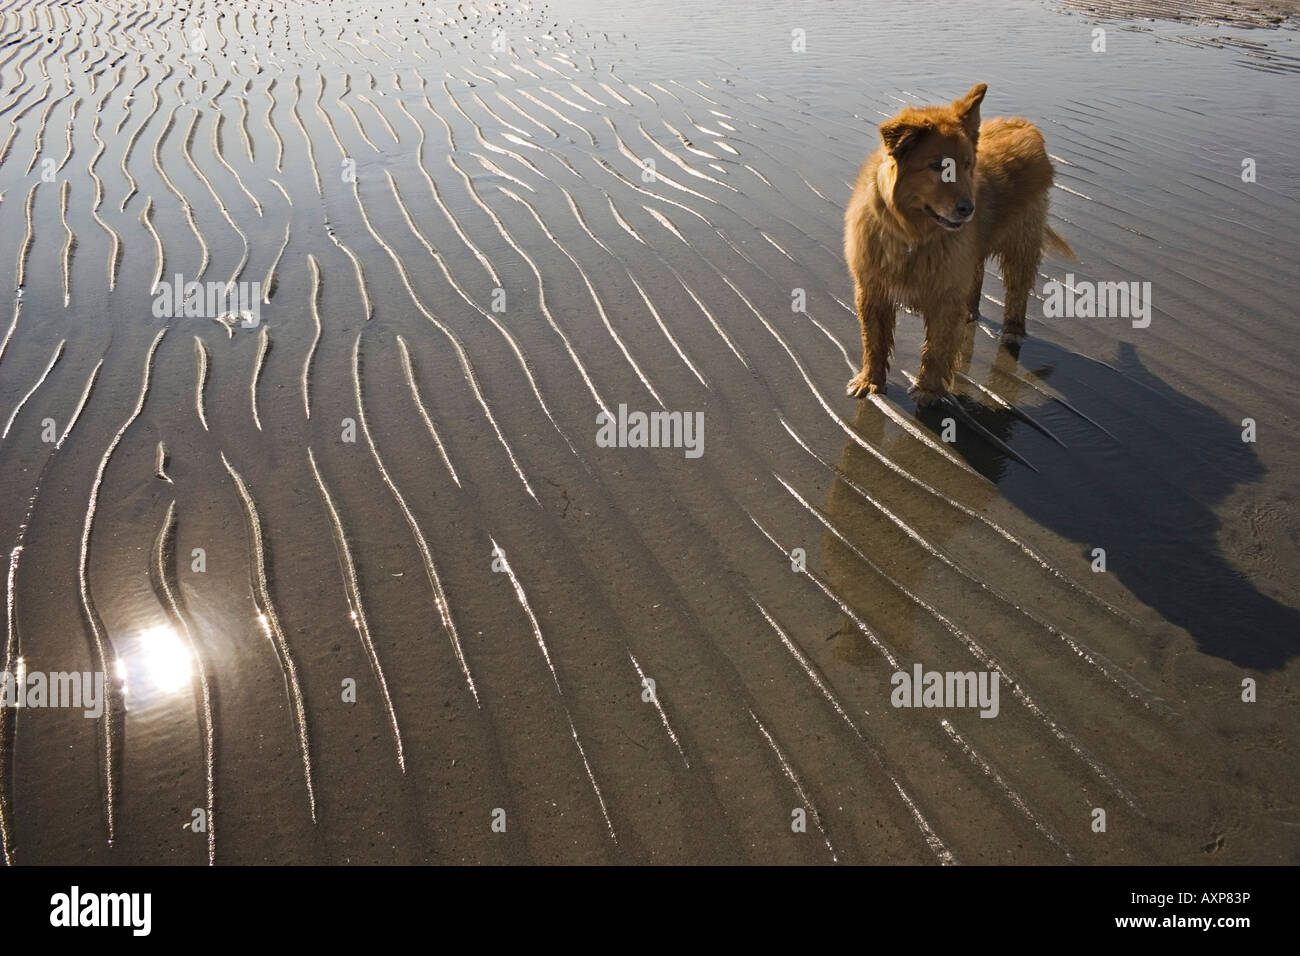 Golden retriever mix dog standing in water @ low tide on beach USA Summer Stock Photo